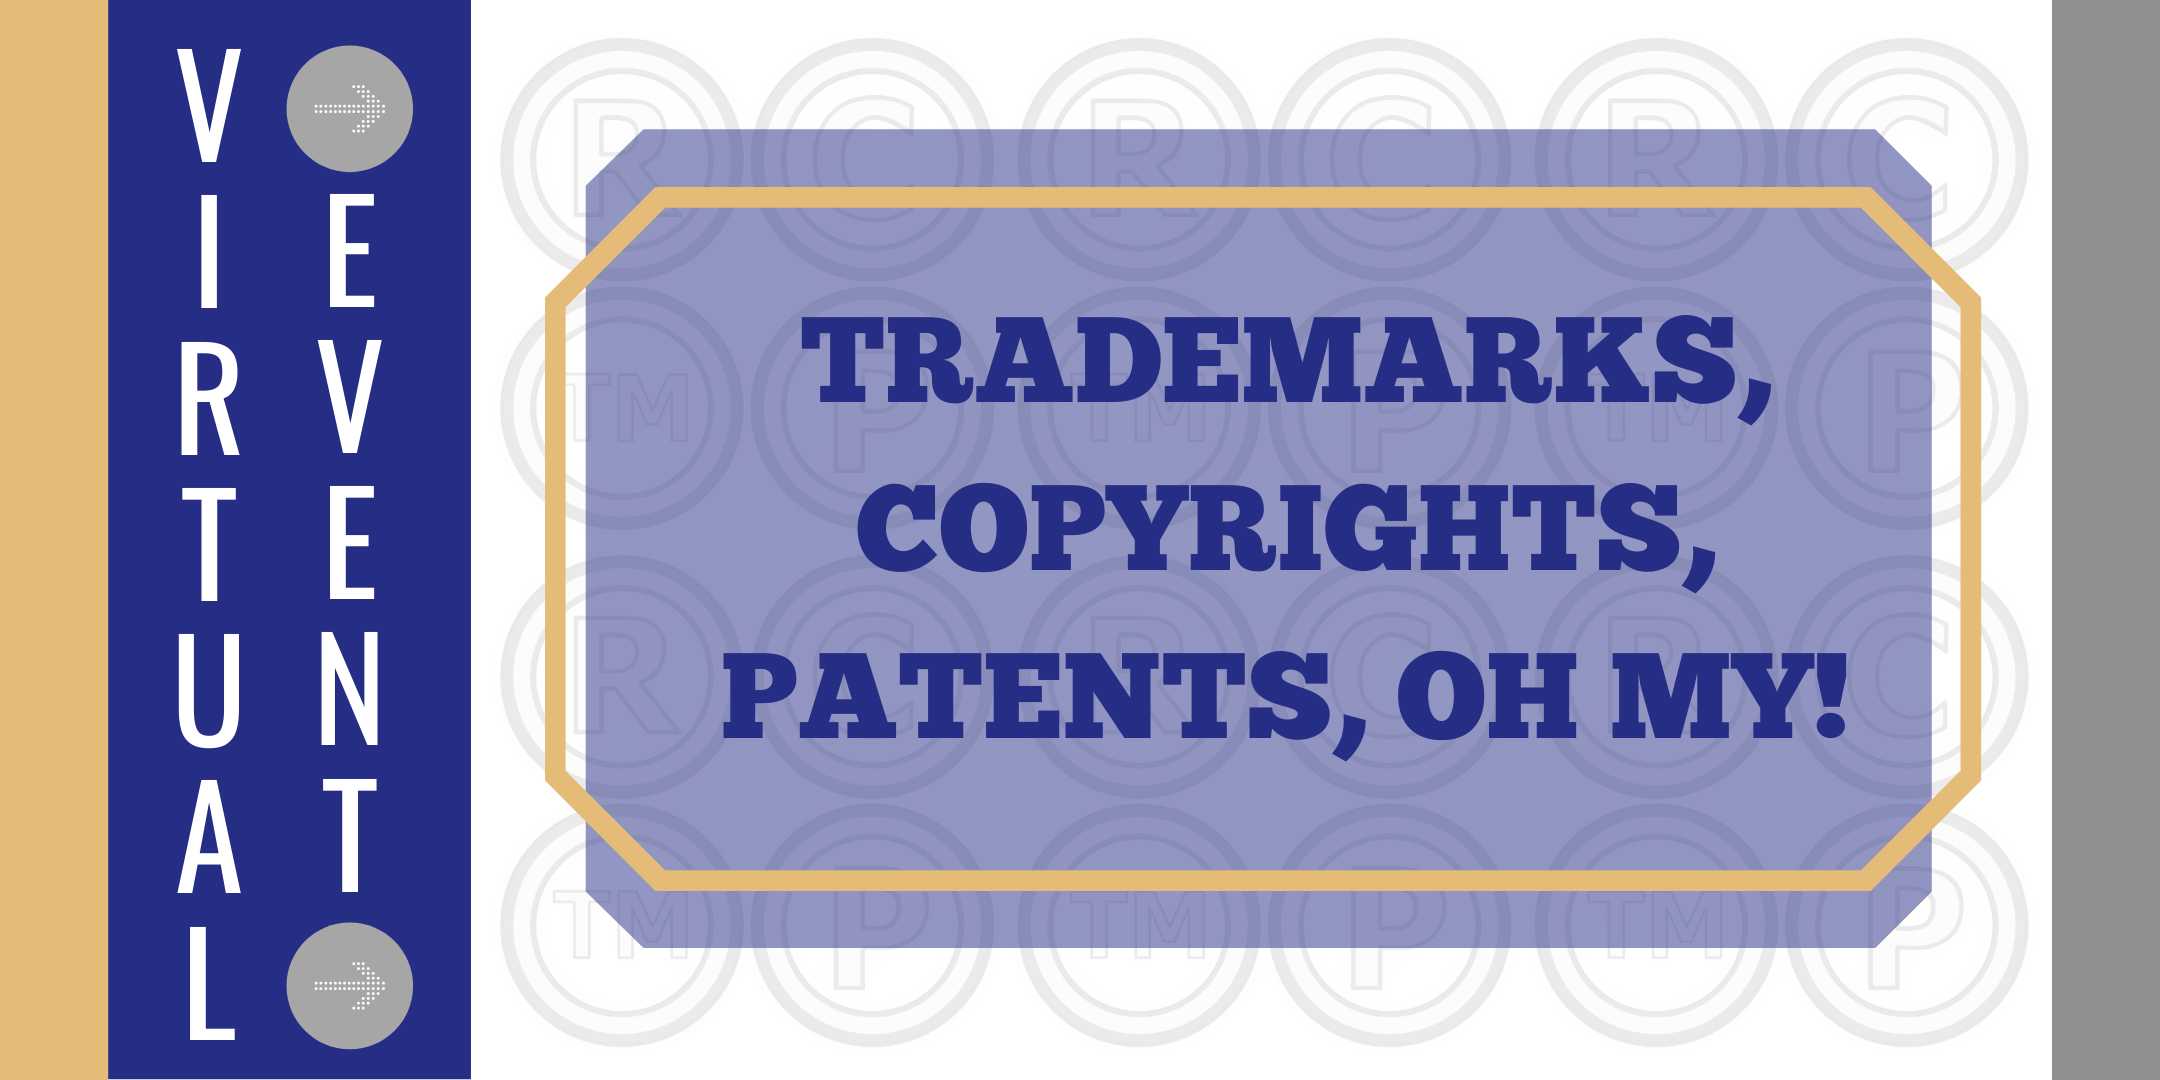 Trademarks, Copyrights, Patents, Oh My! image